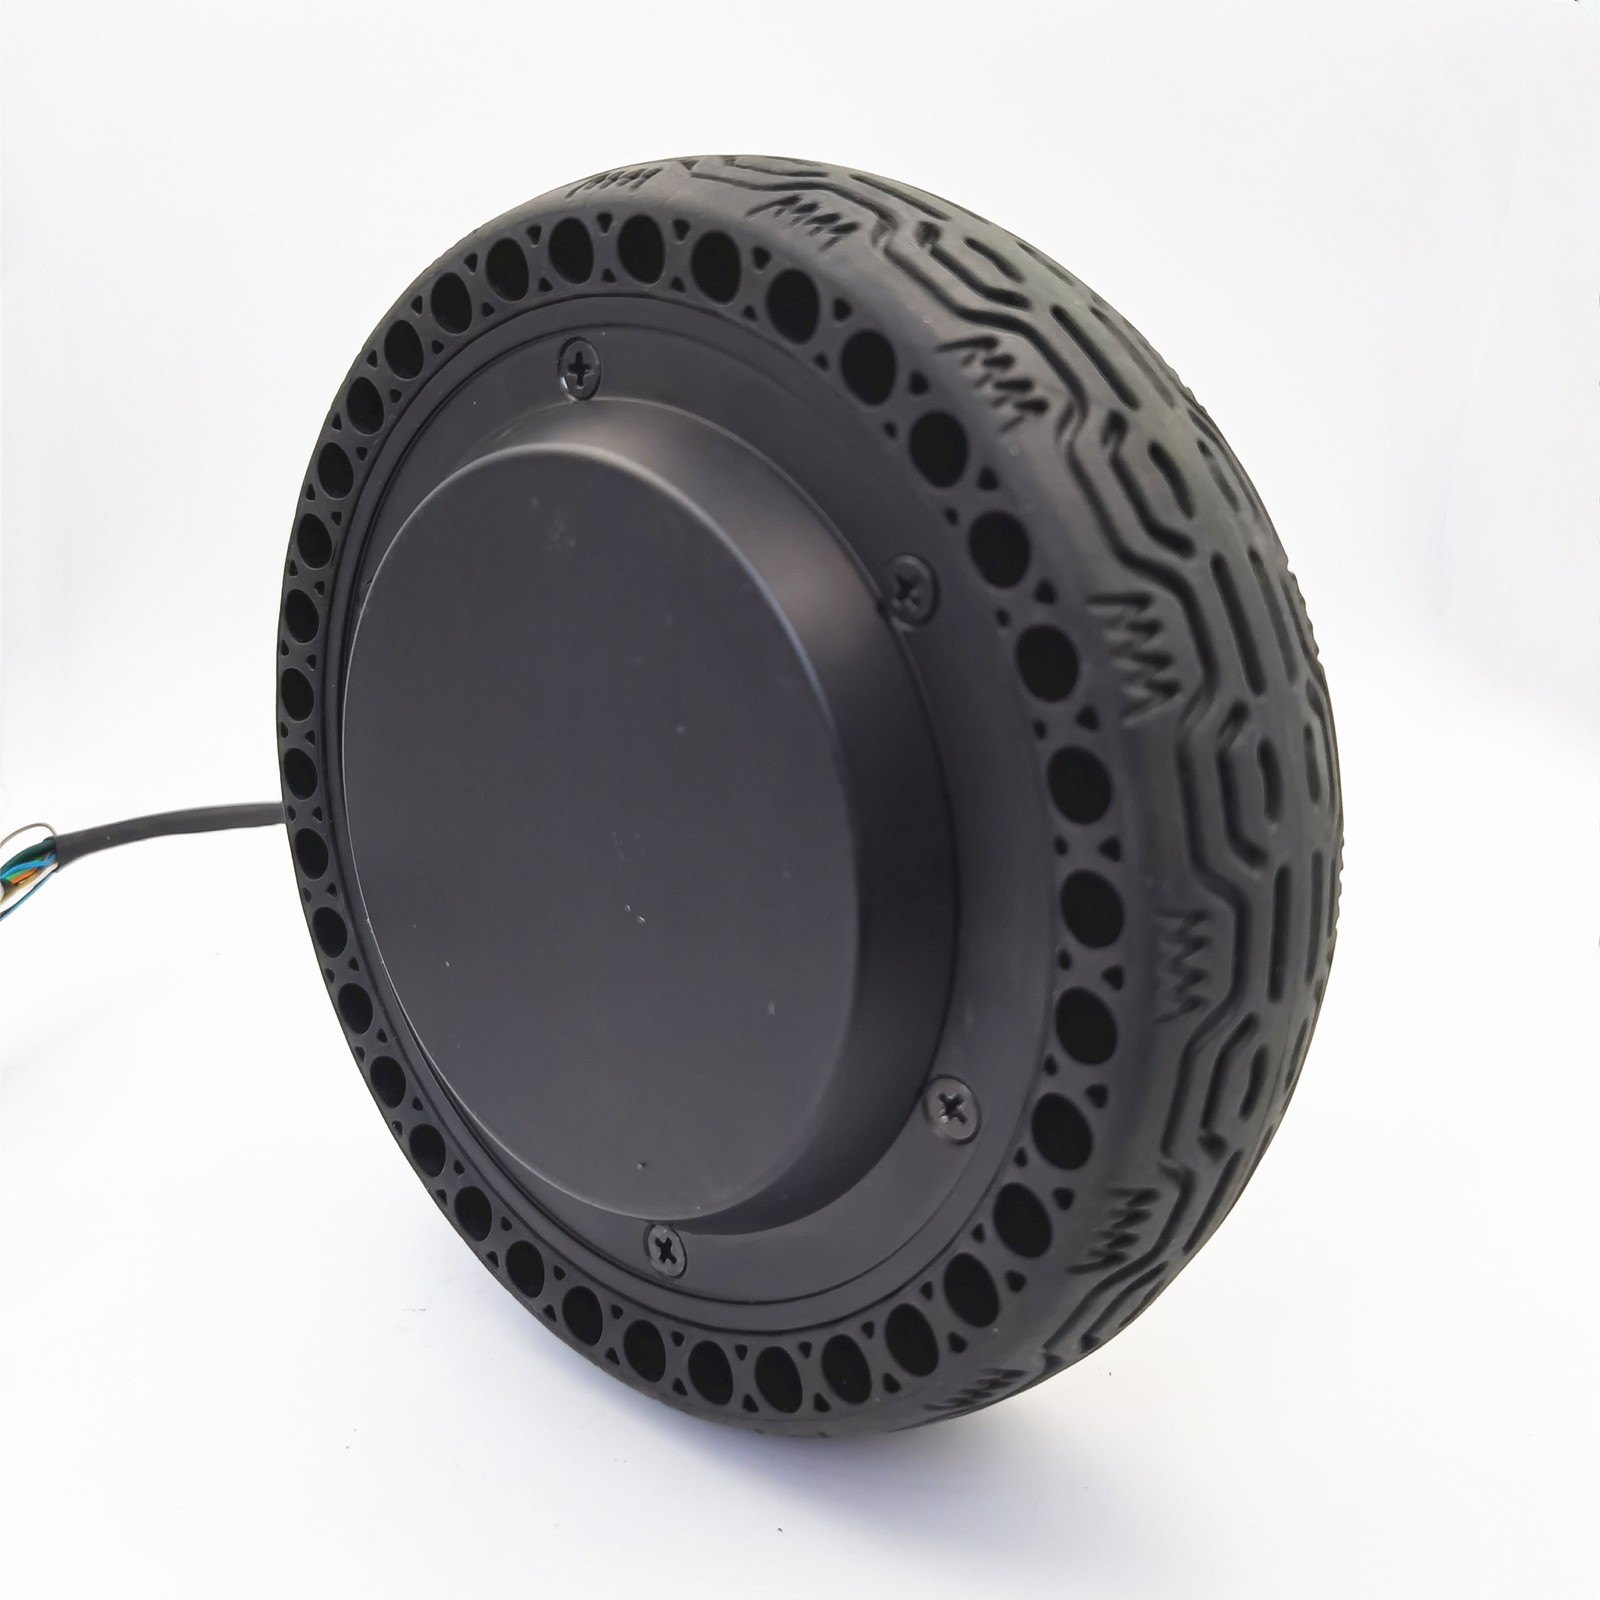 6.5 Inch Shock Absorbent Honeycomb Tires Hub Motor With Builtin Encoder